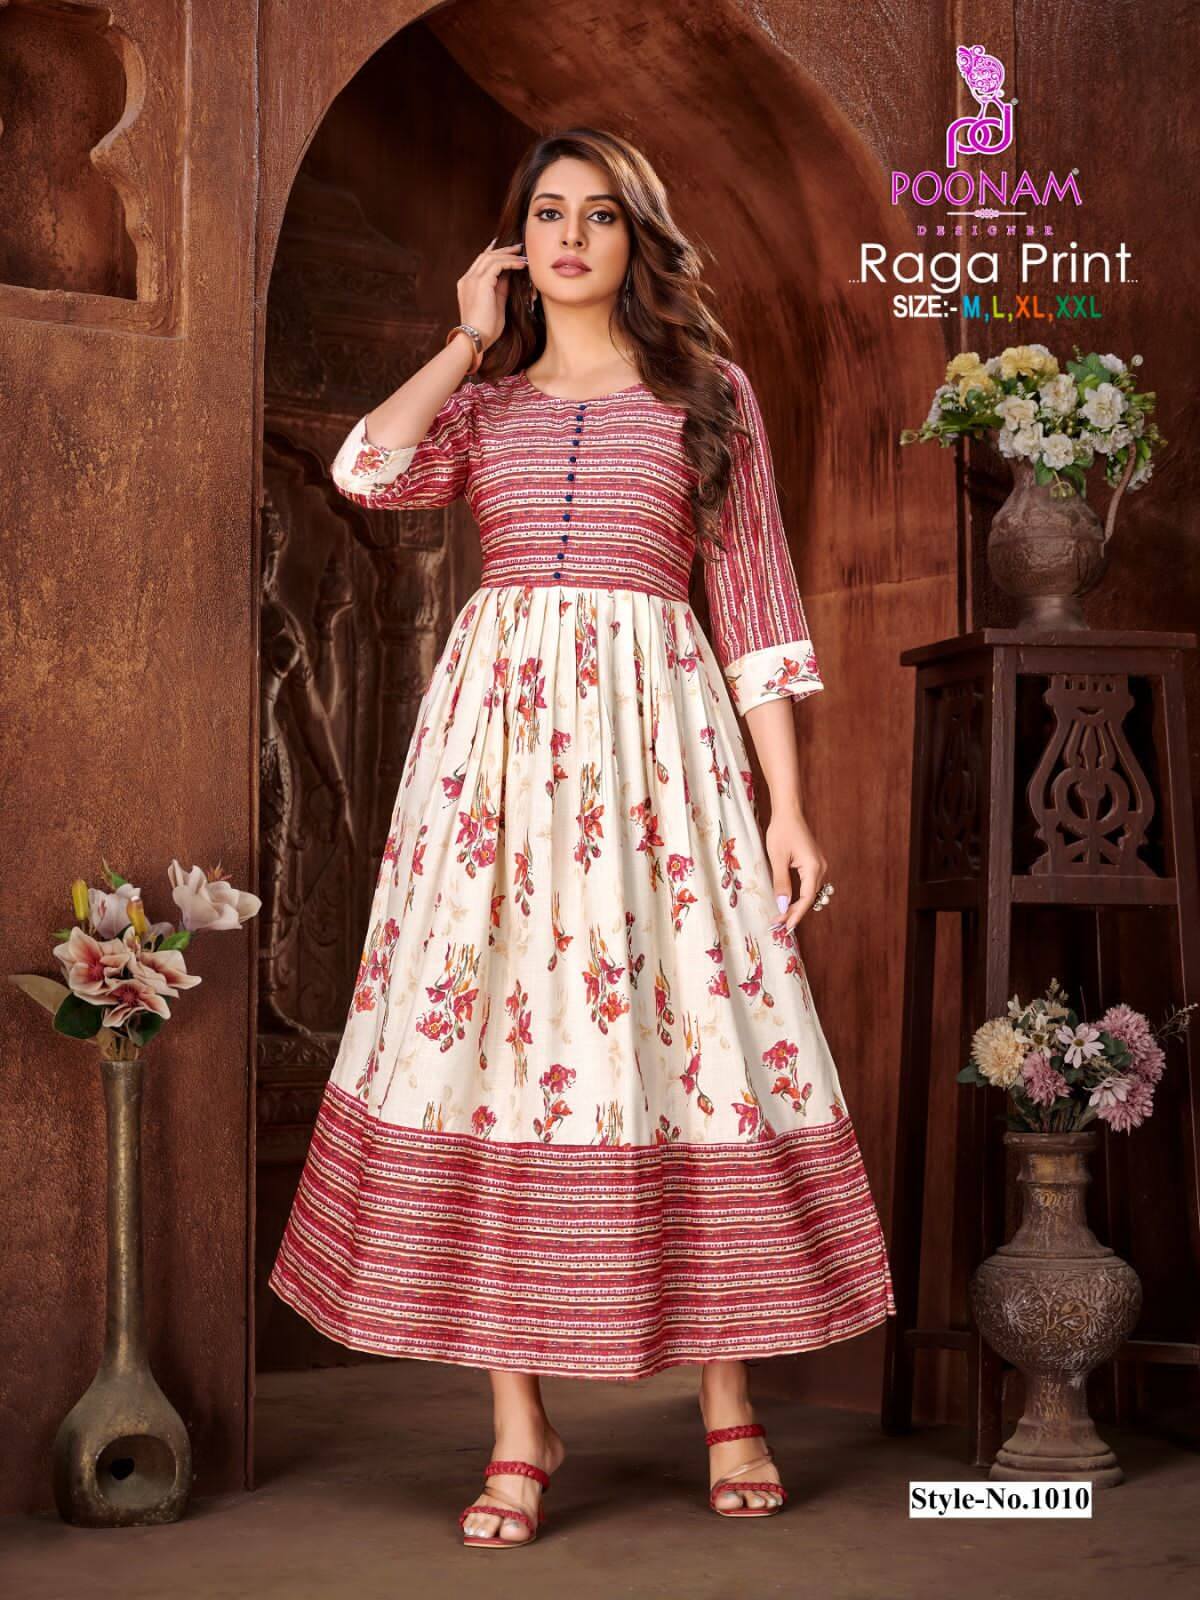 Poonam Raga Print Gowns Catalog collection 6